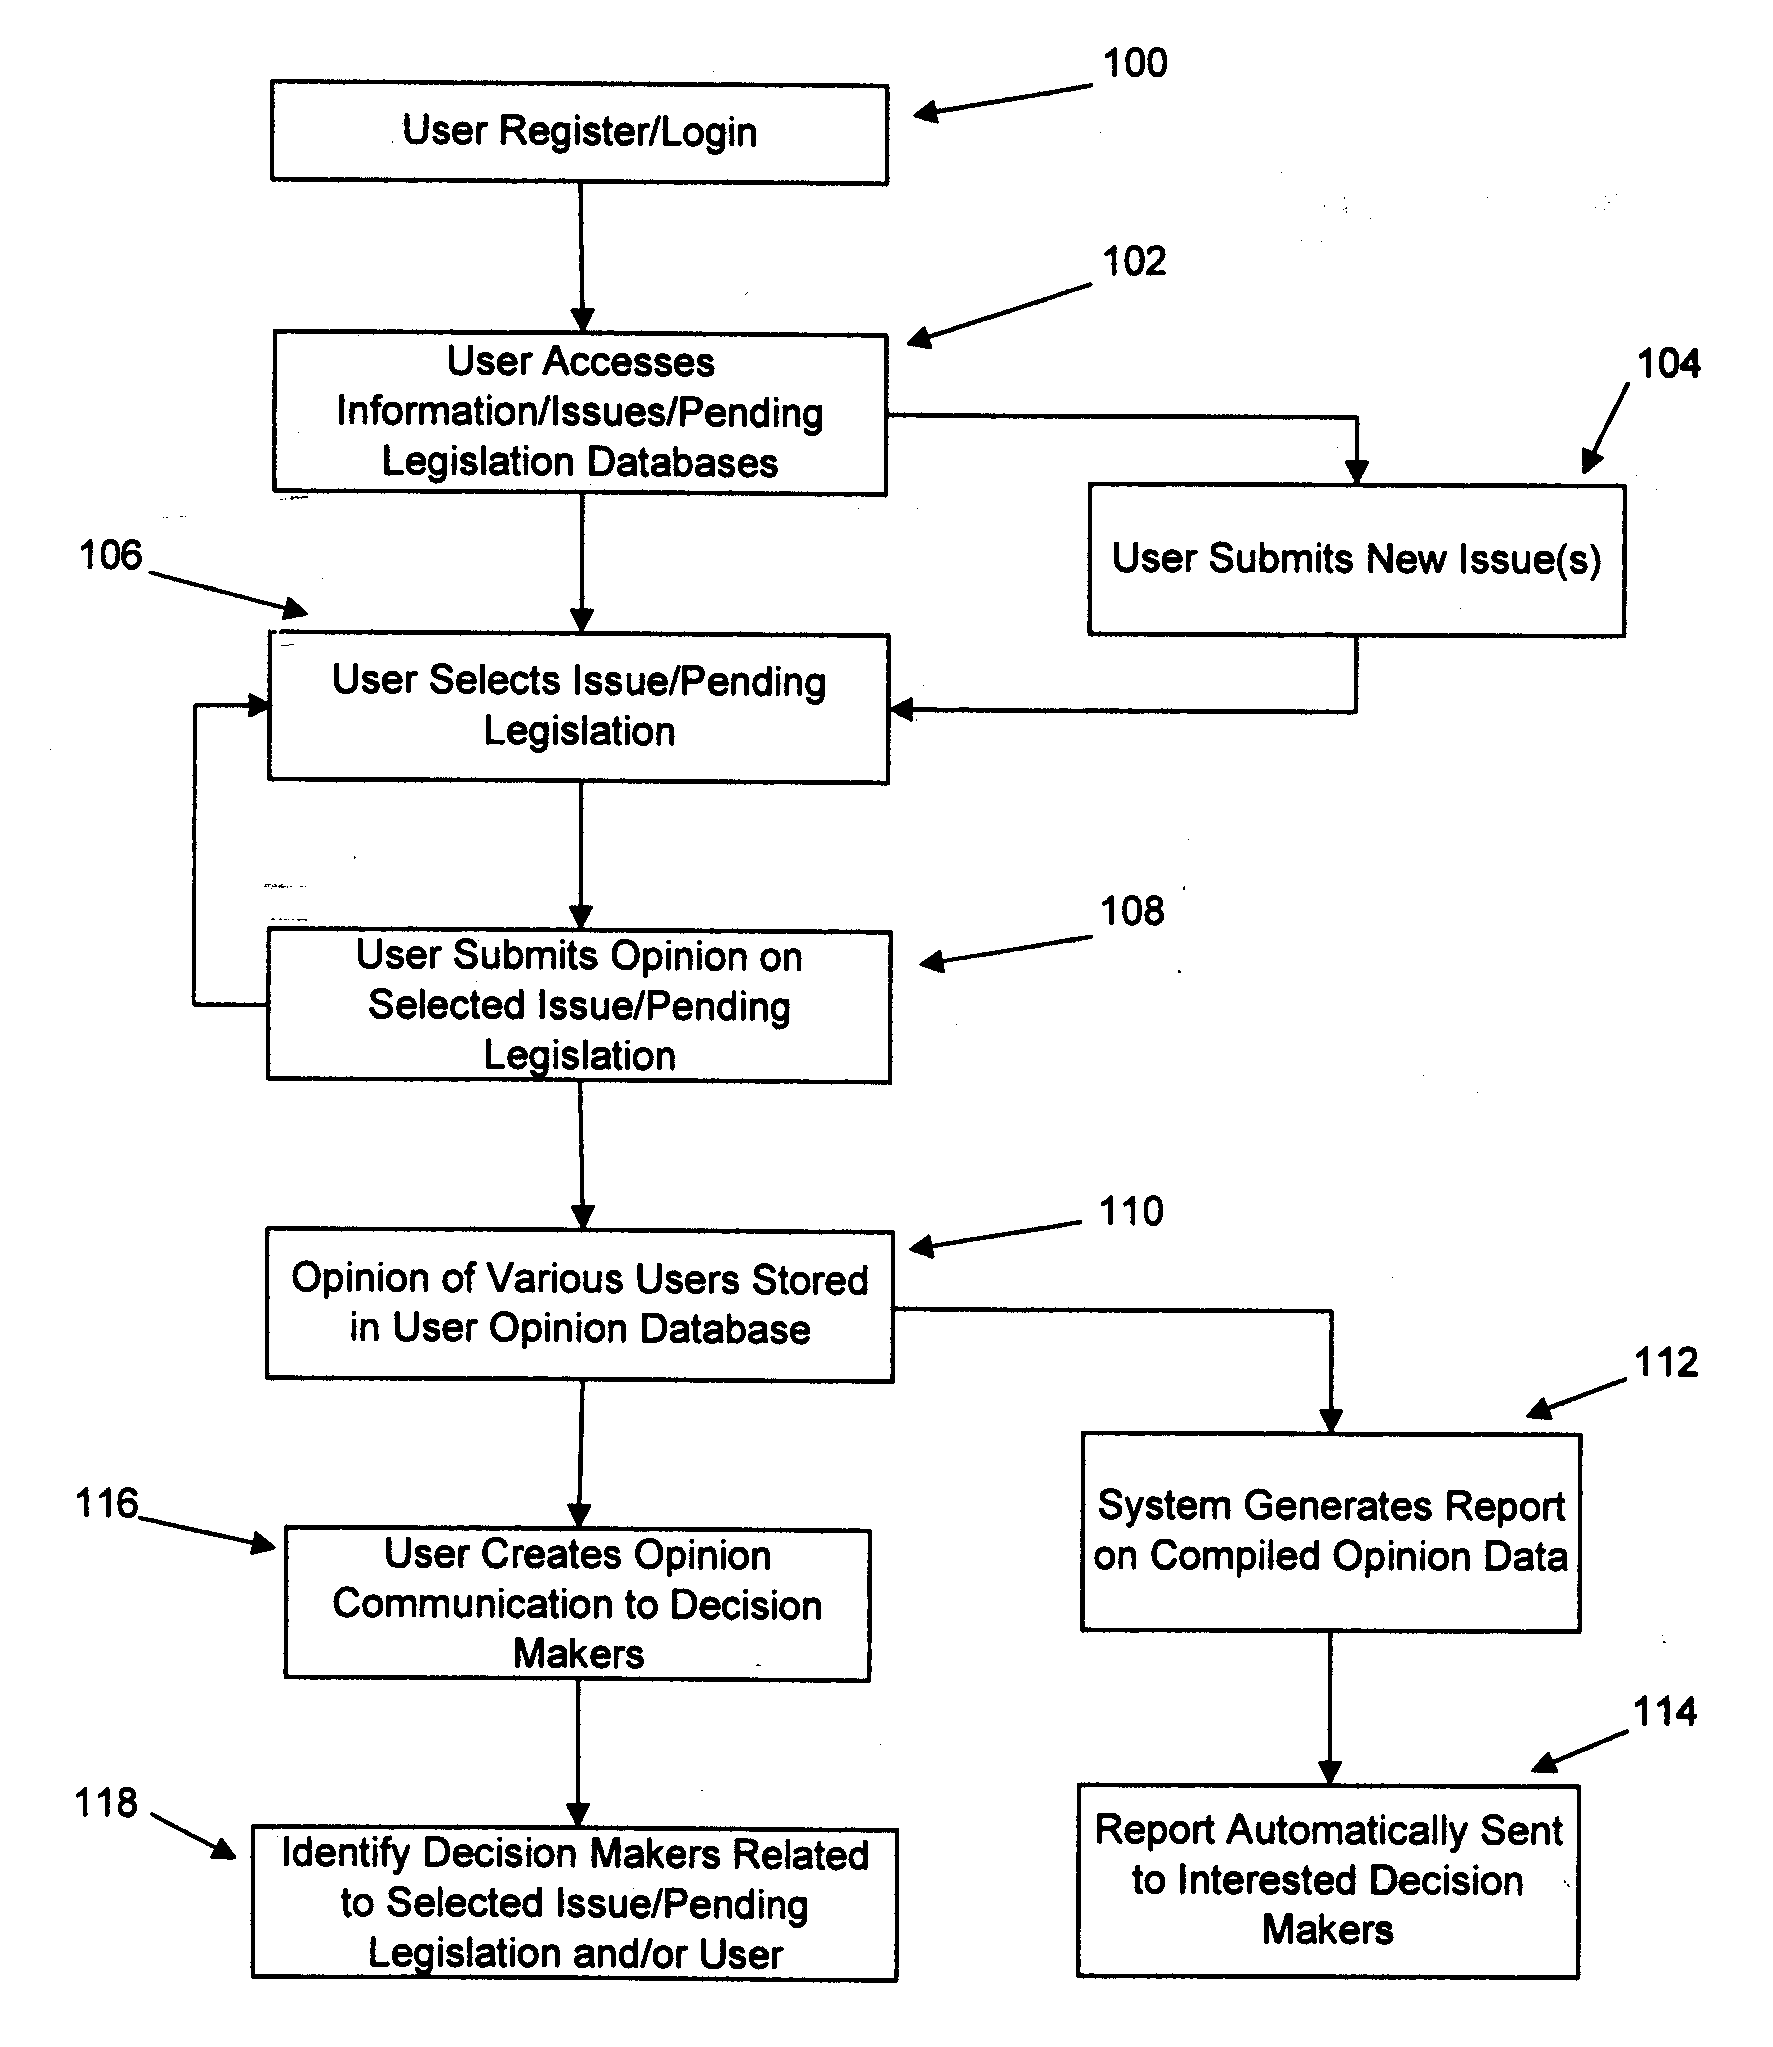 Method for compiling, trend-tracking, transmitting and reporting opinion data